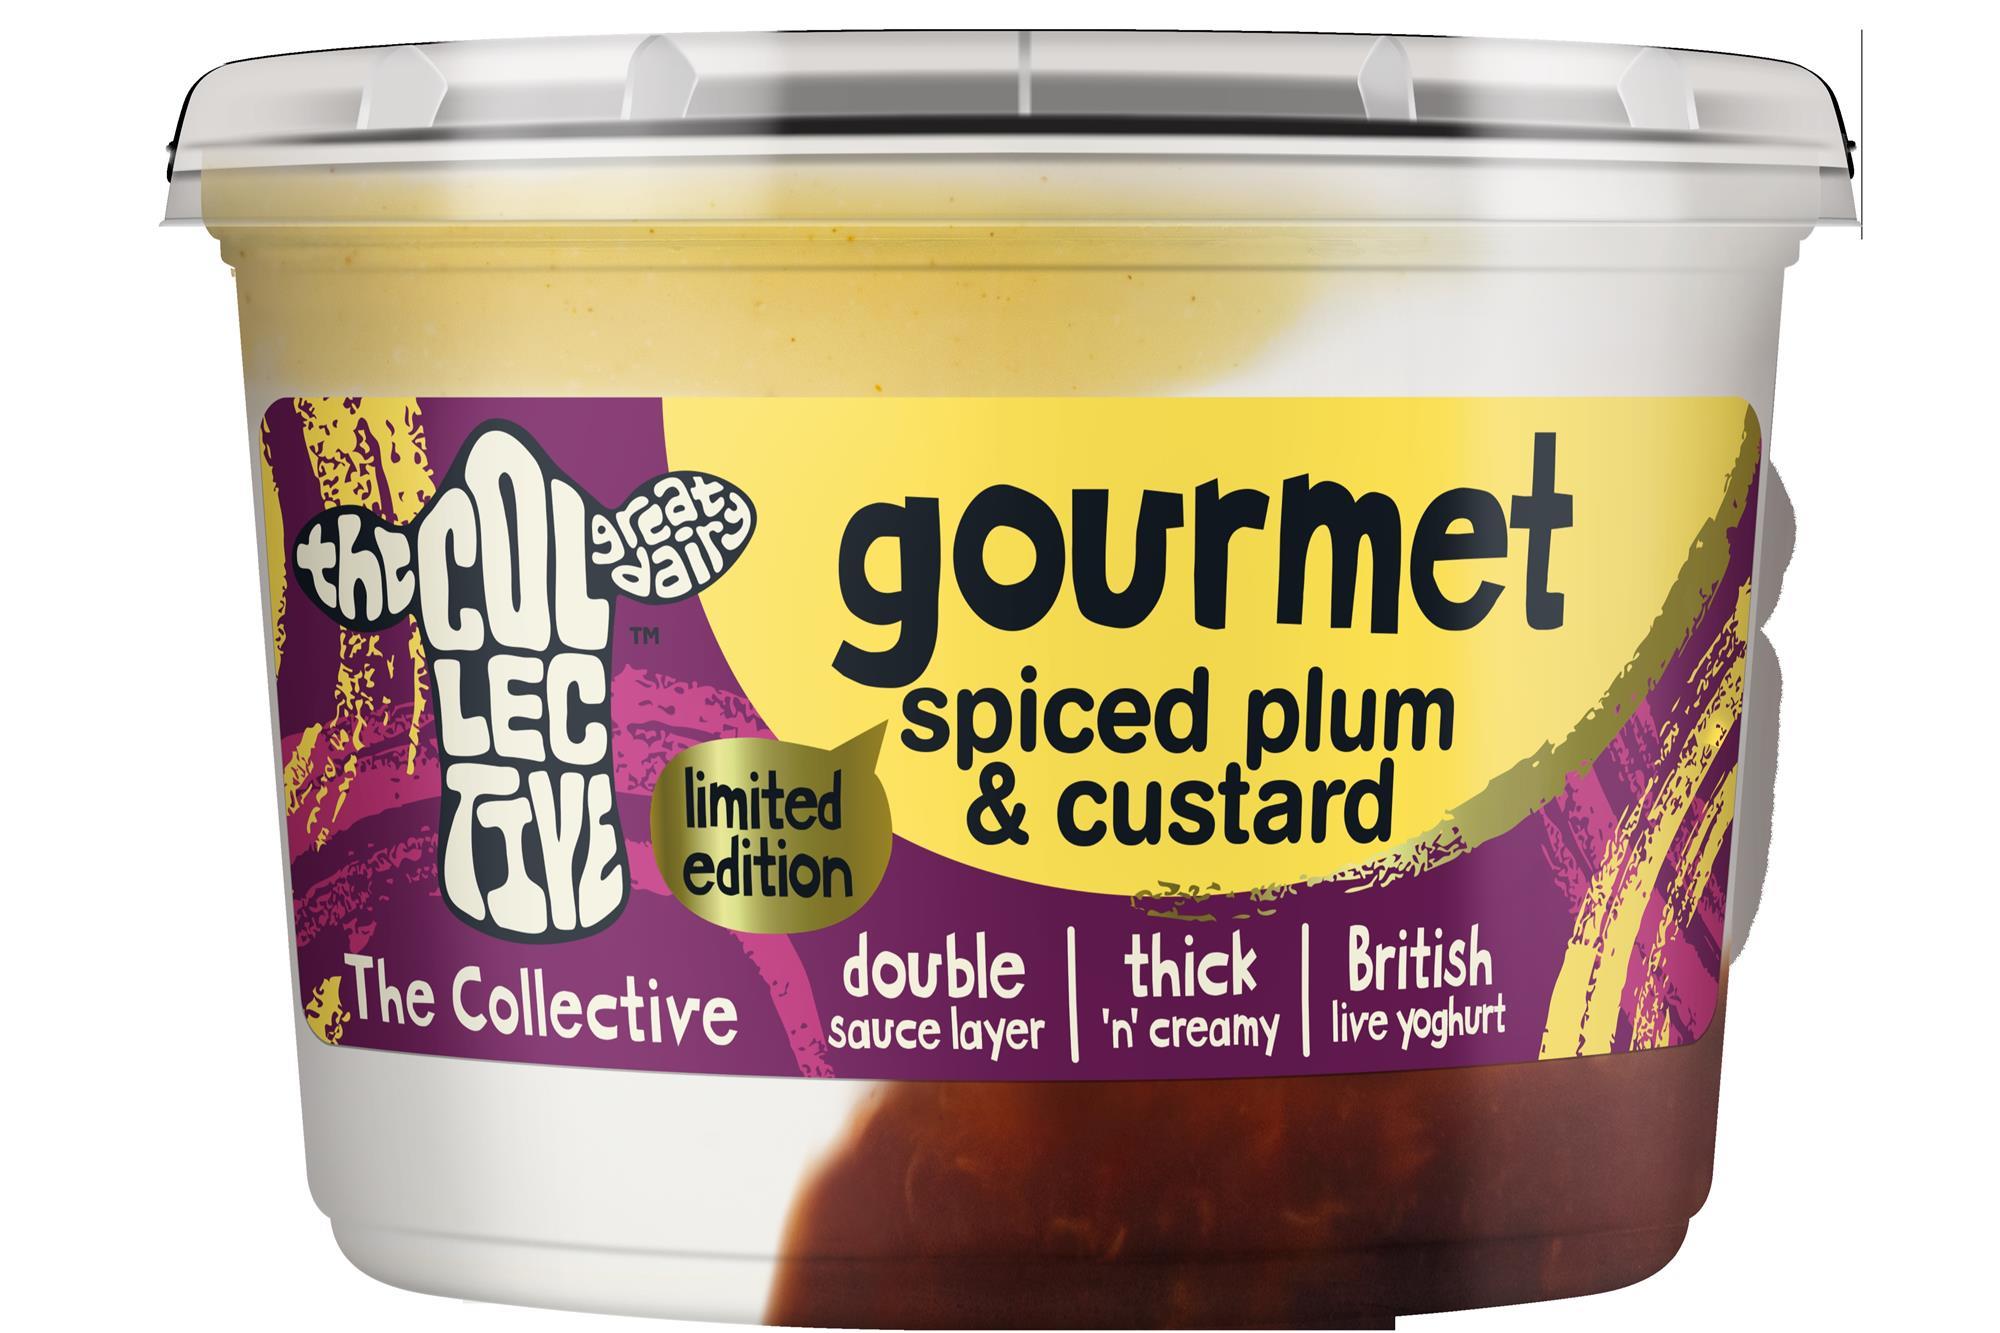 The Collective launches limited-edition spiced plum & custard